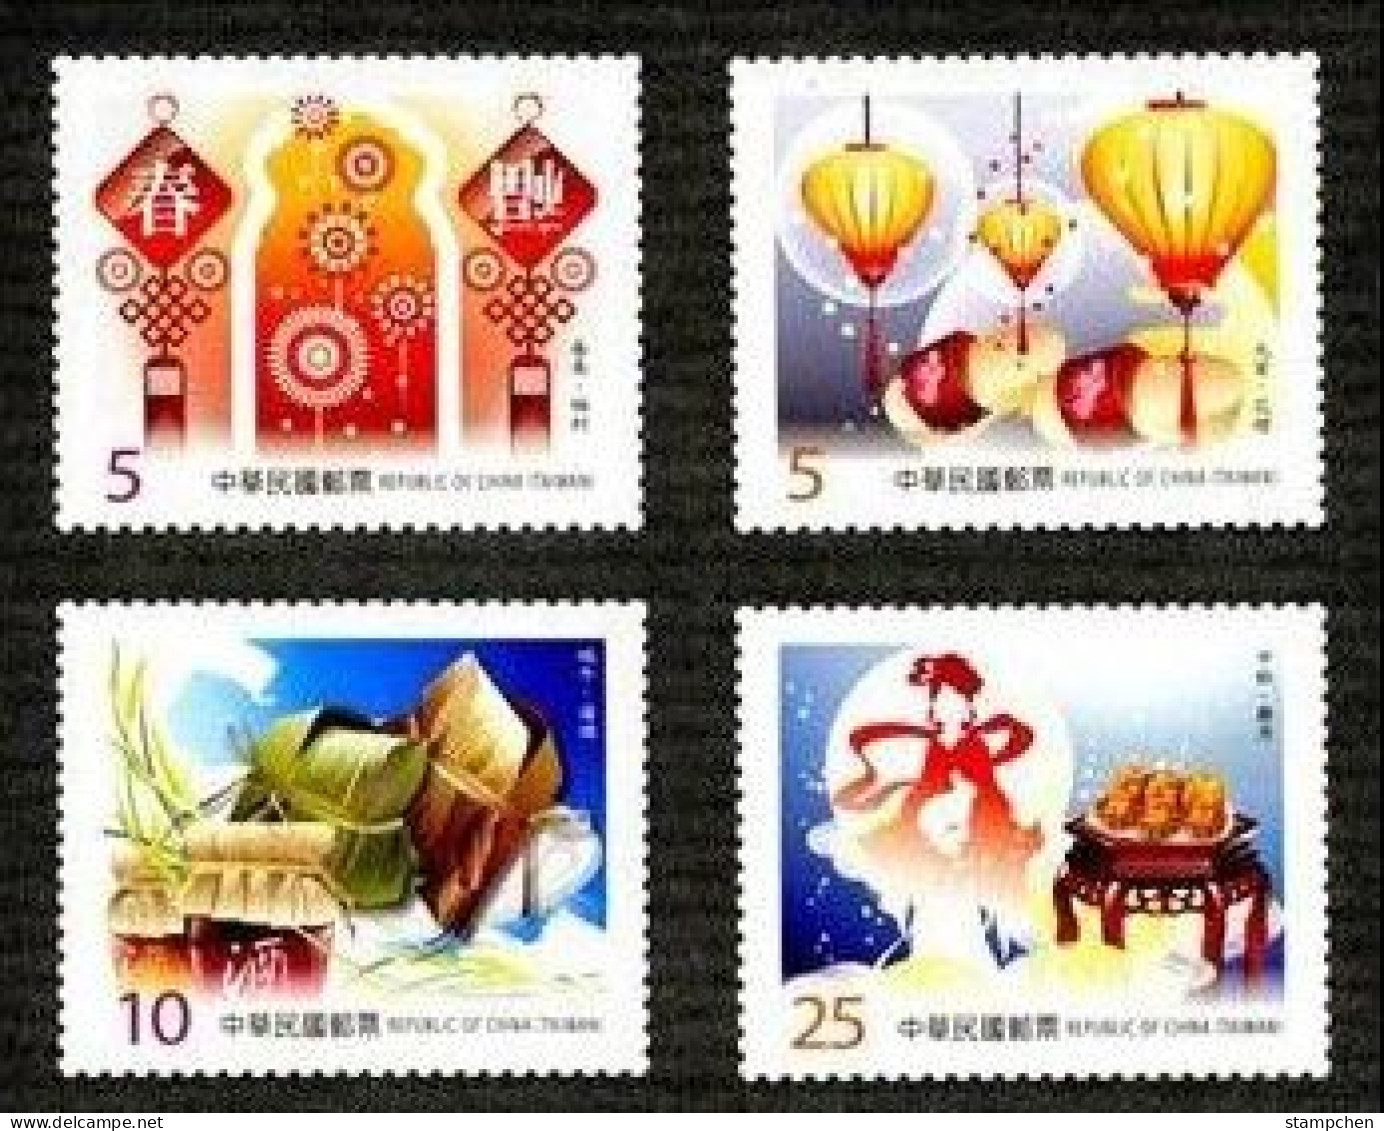 Taiwan 2012 Traditional Festival Stamps New Year Lantern Dragon Boat Moon Firework Rice Wine Insect Hare Autumn Cake - Neufs